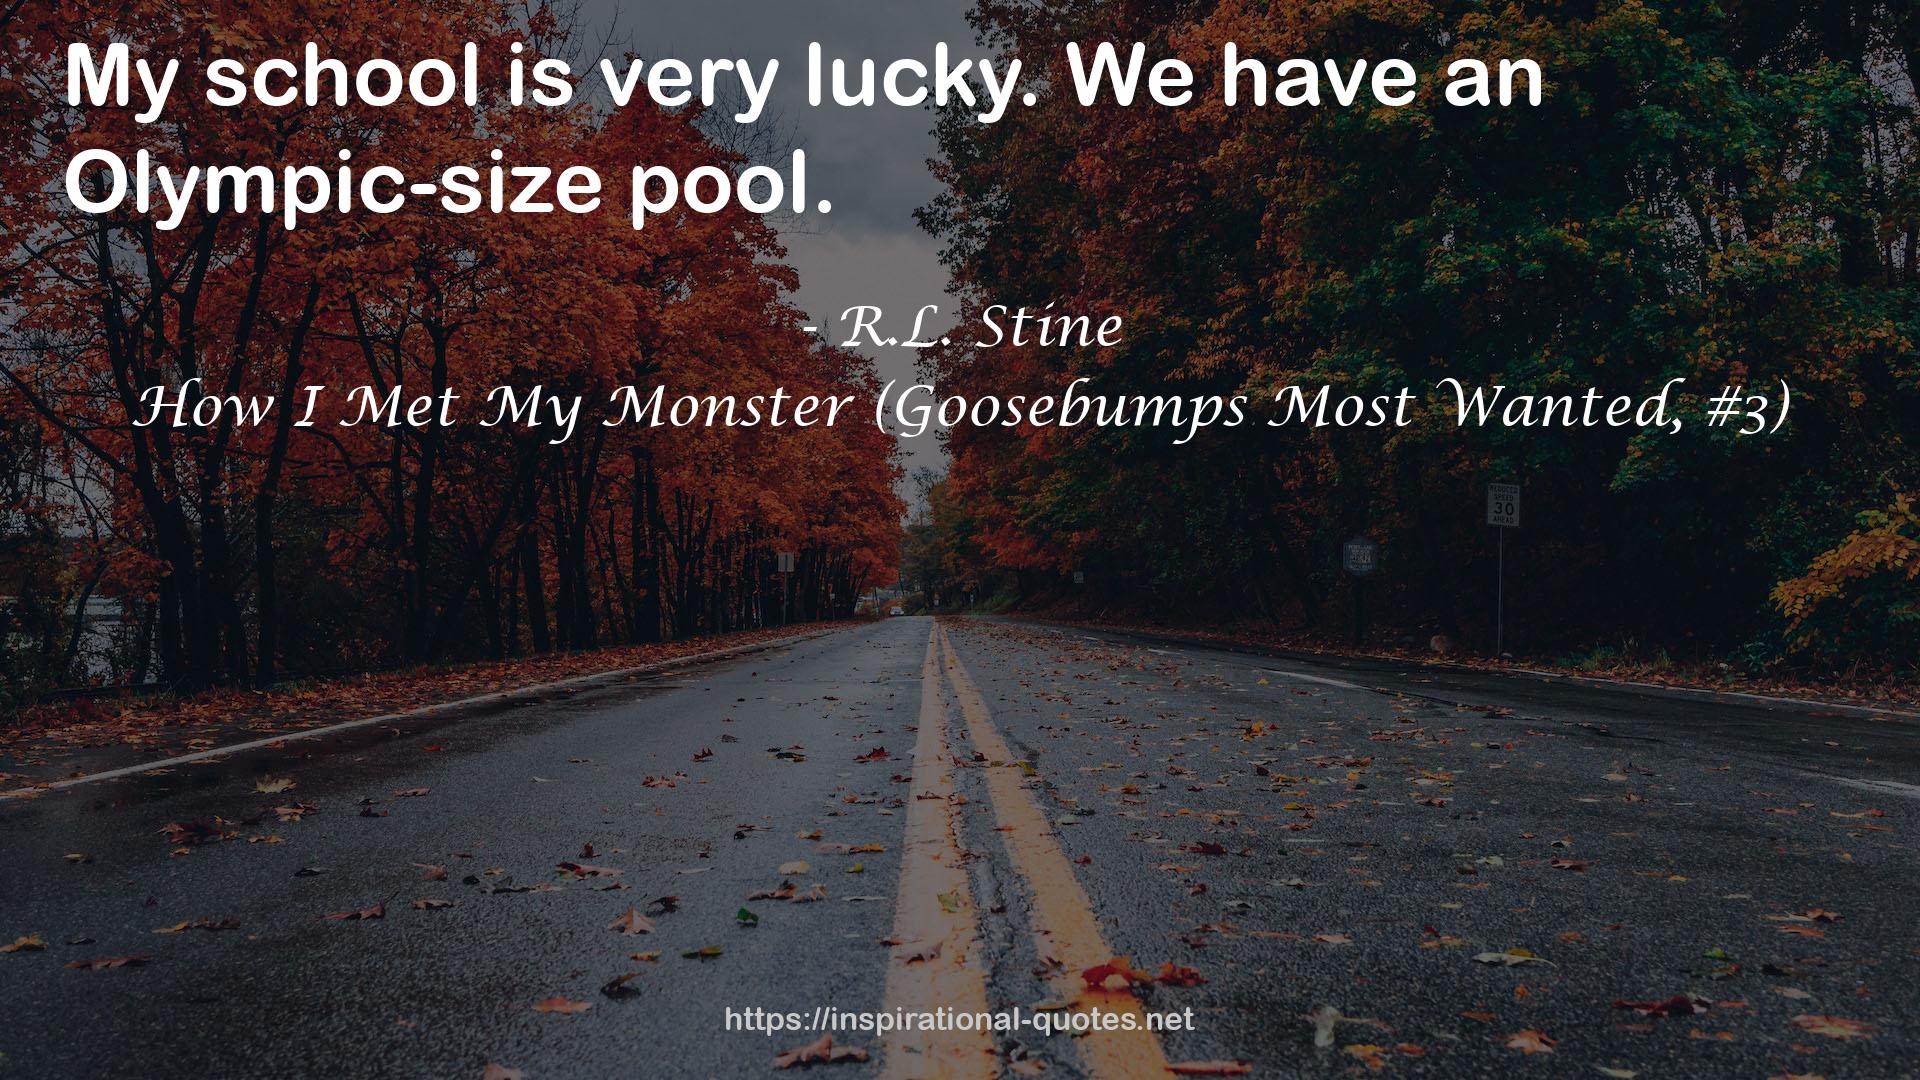 How I Met My Monster (Goosebumps Most Wanted, #3) QUOTES